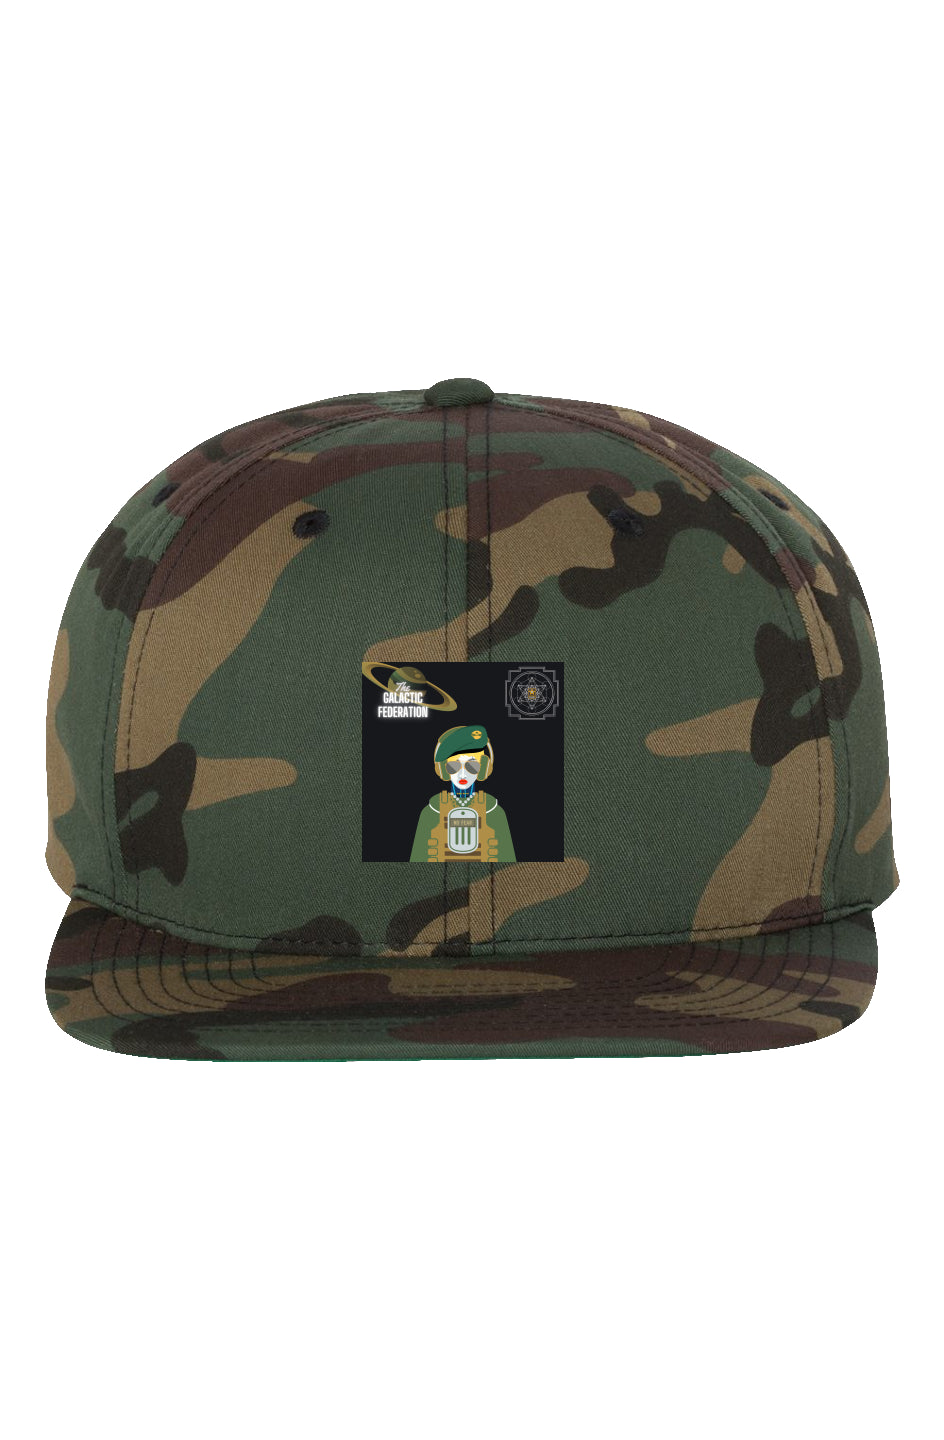 Bully-Proof NFT US Army Collection Green Camo Premium Snapback